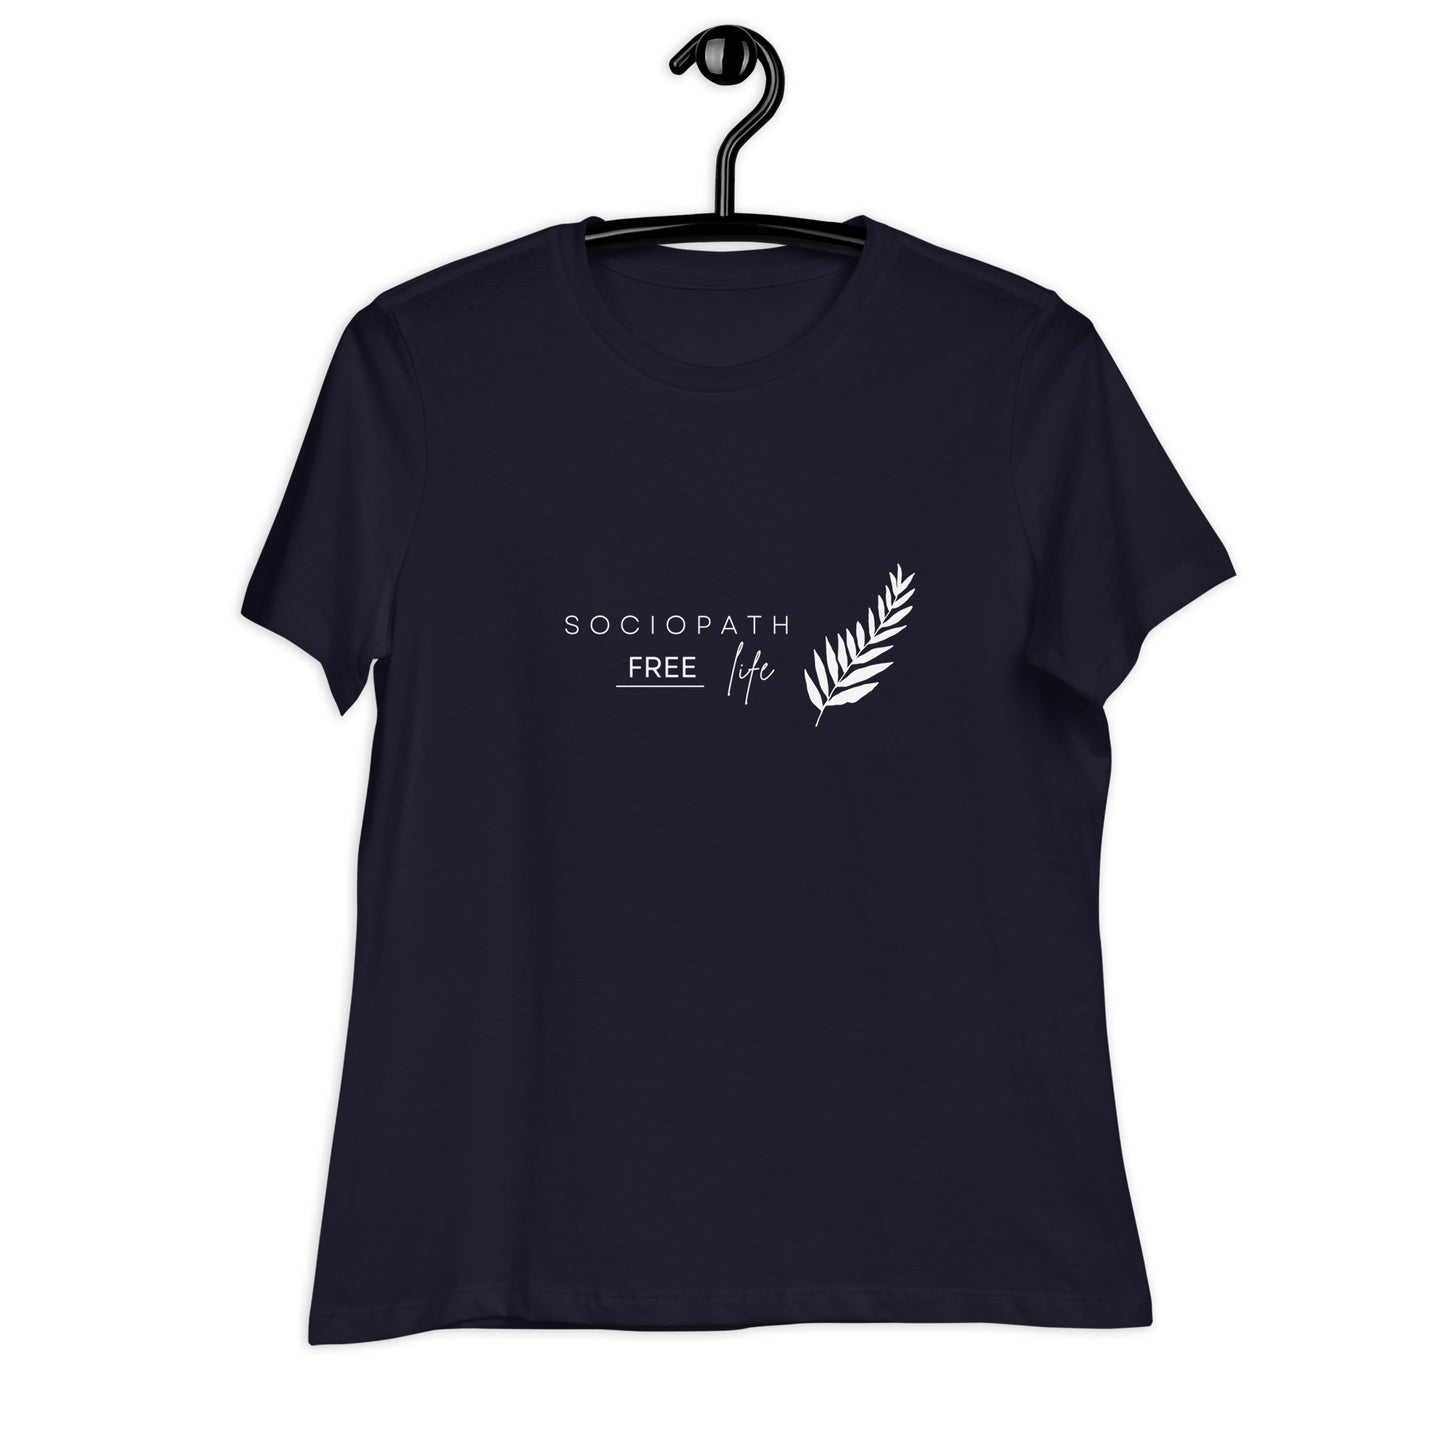 Sociopath Free Life, Women's Relaxed T-Shirt